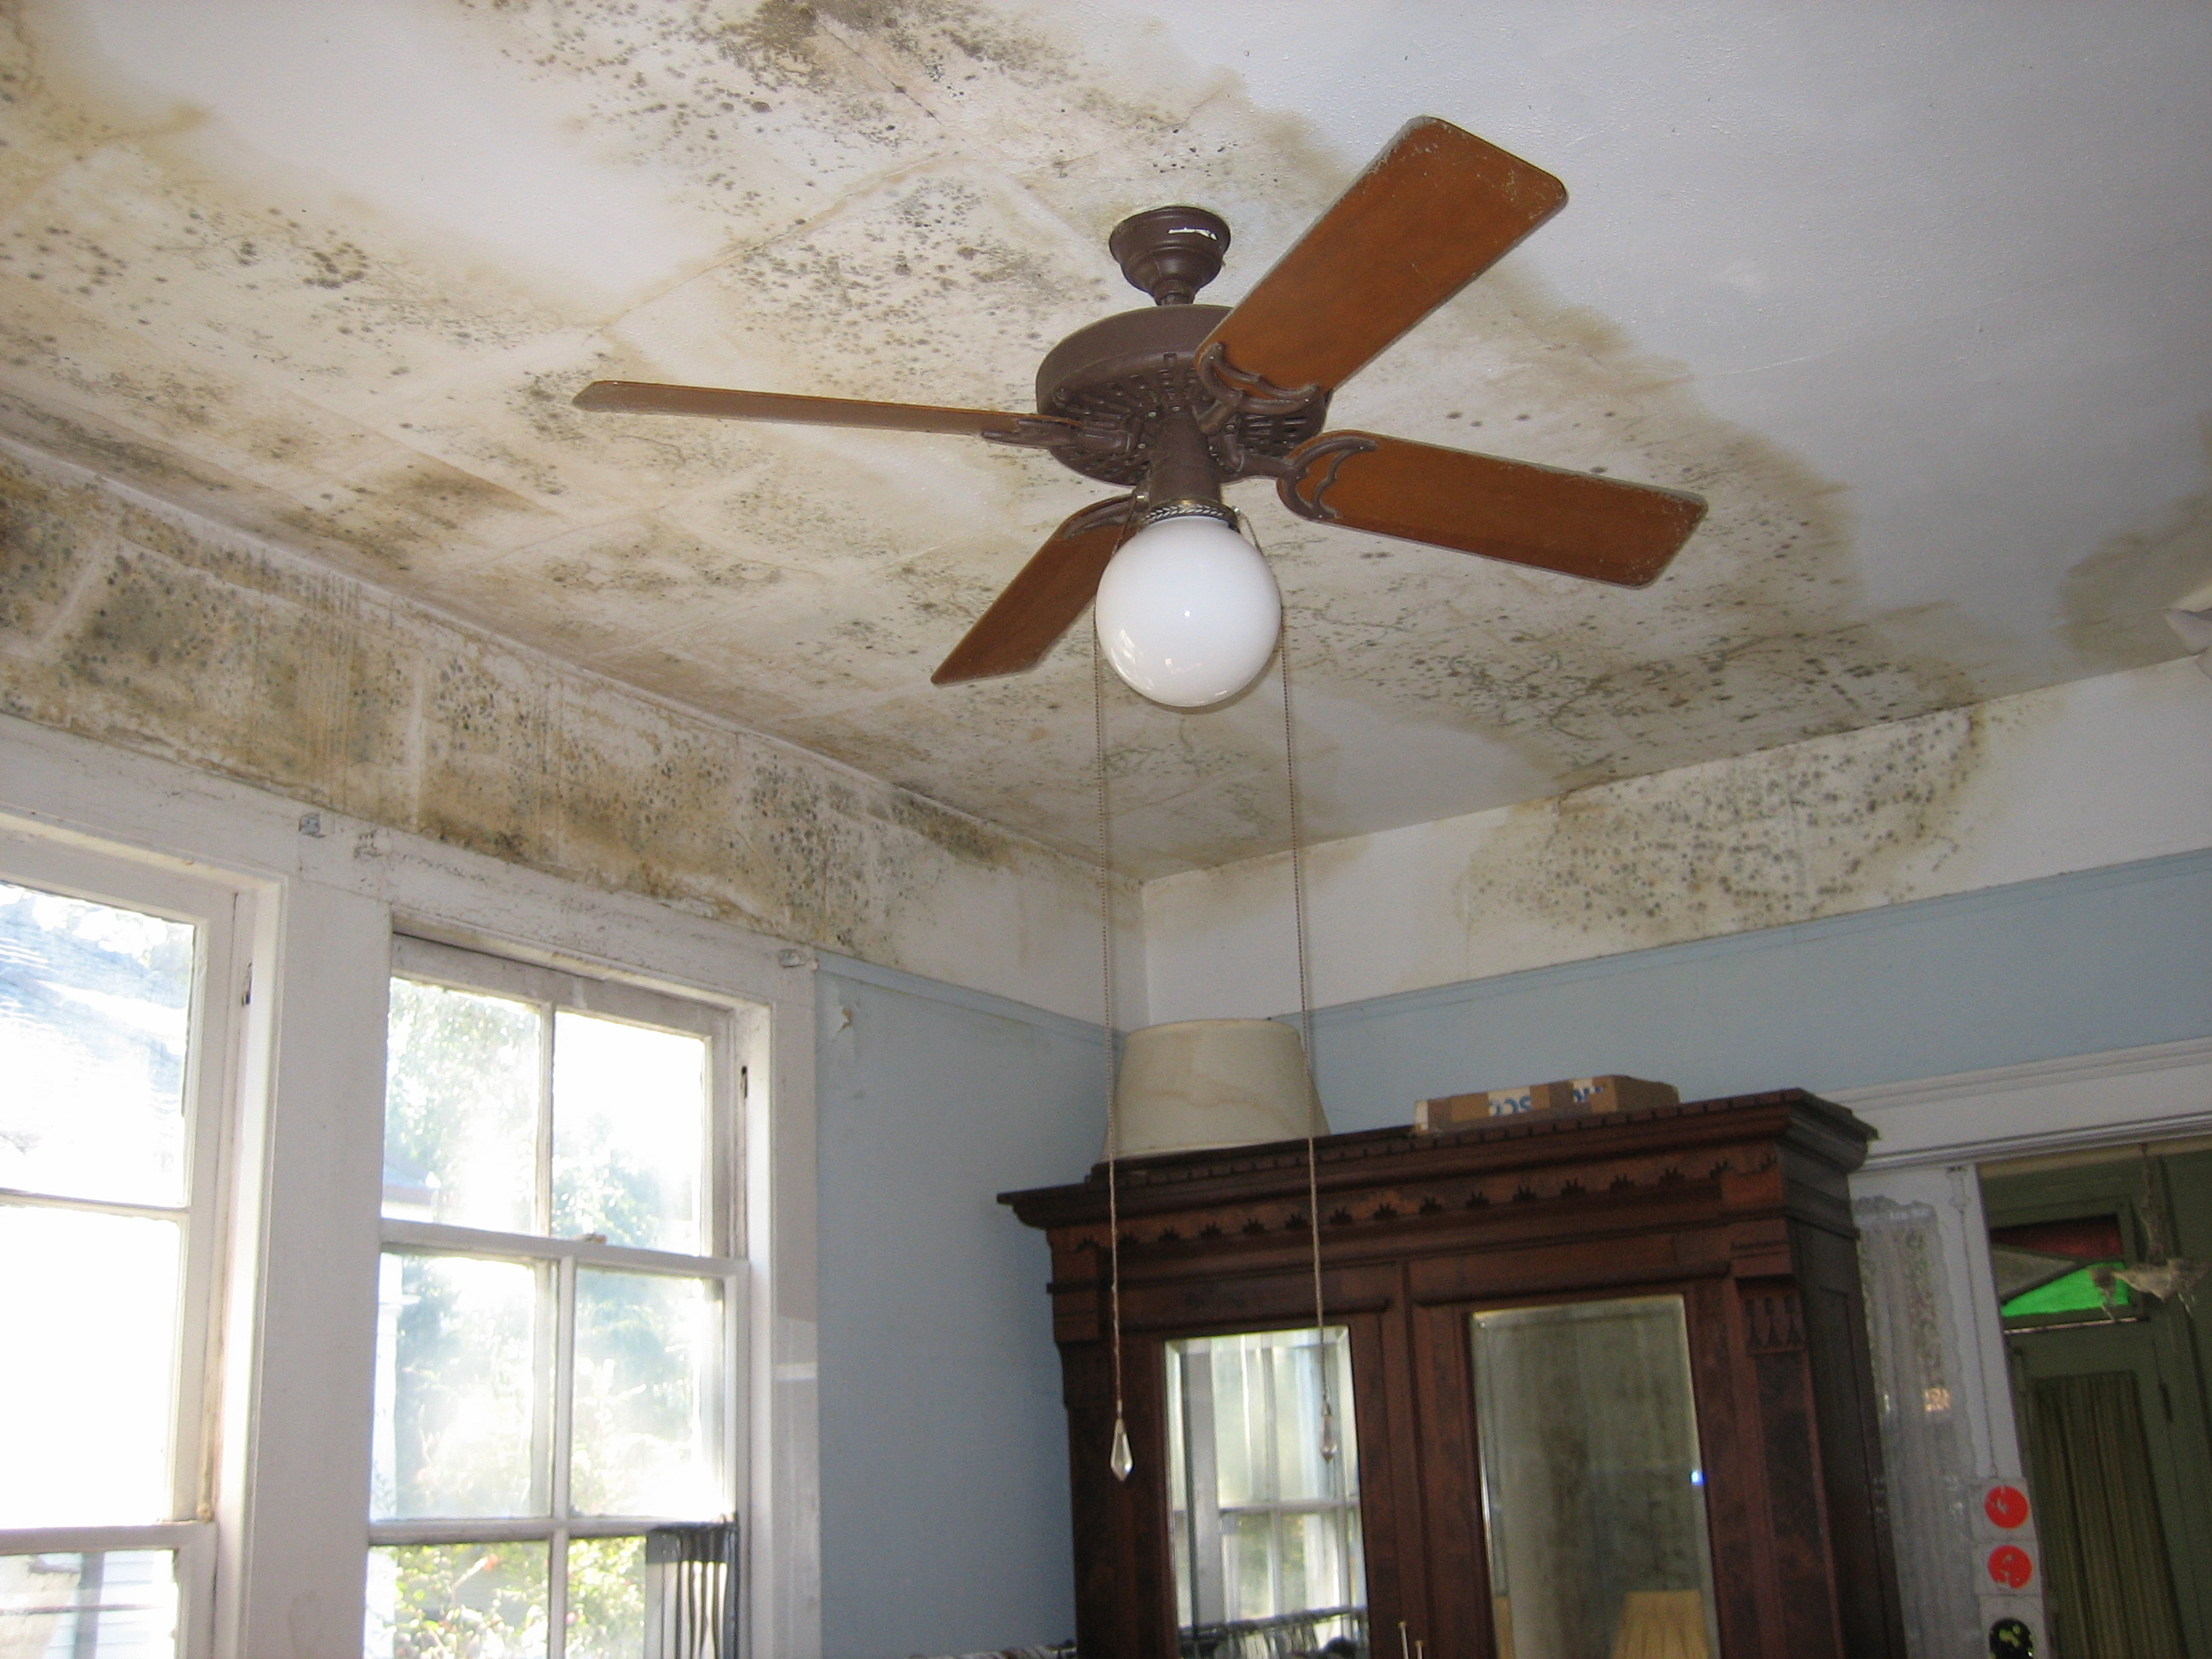 How Much Does Damp Devalue a House?